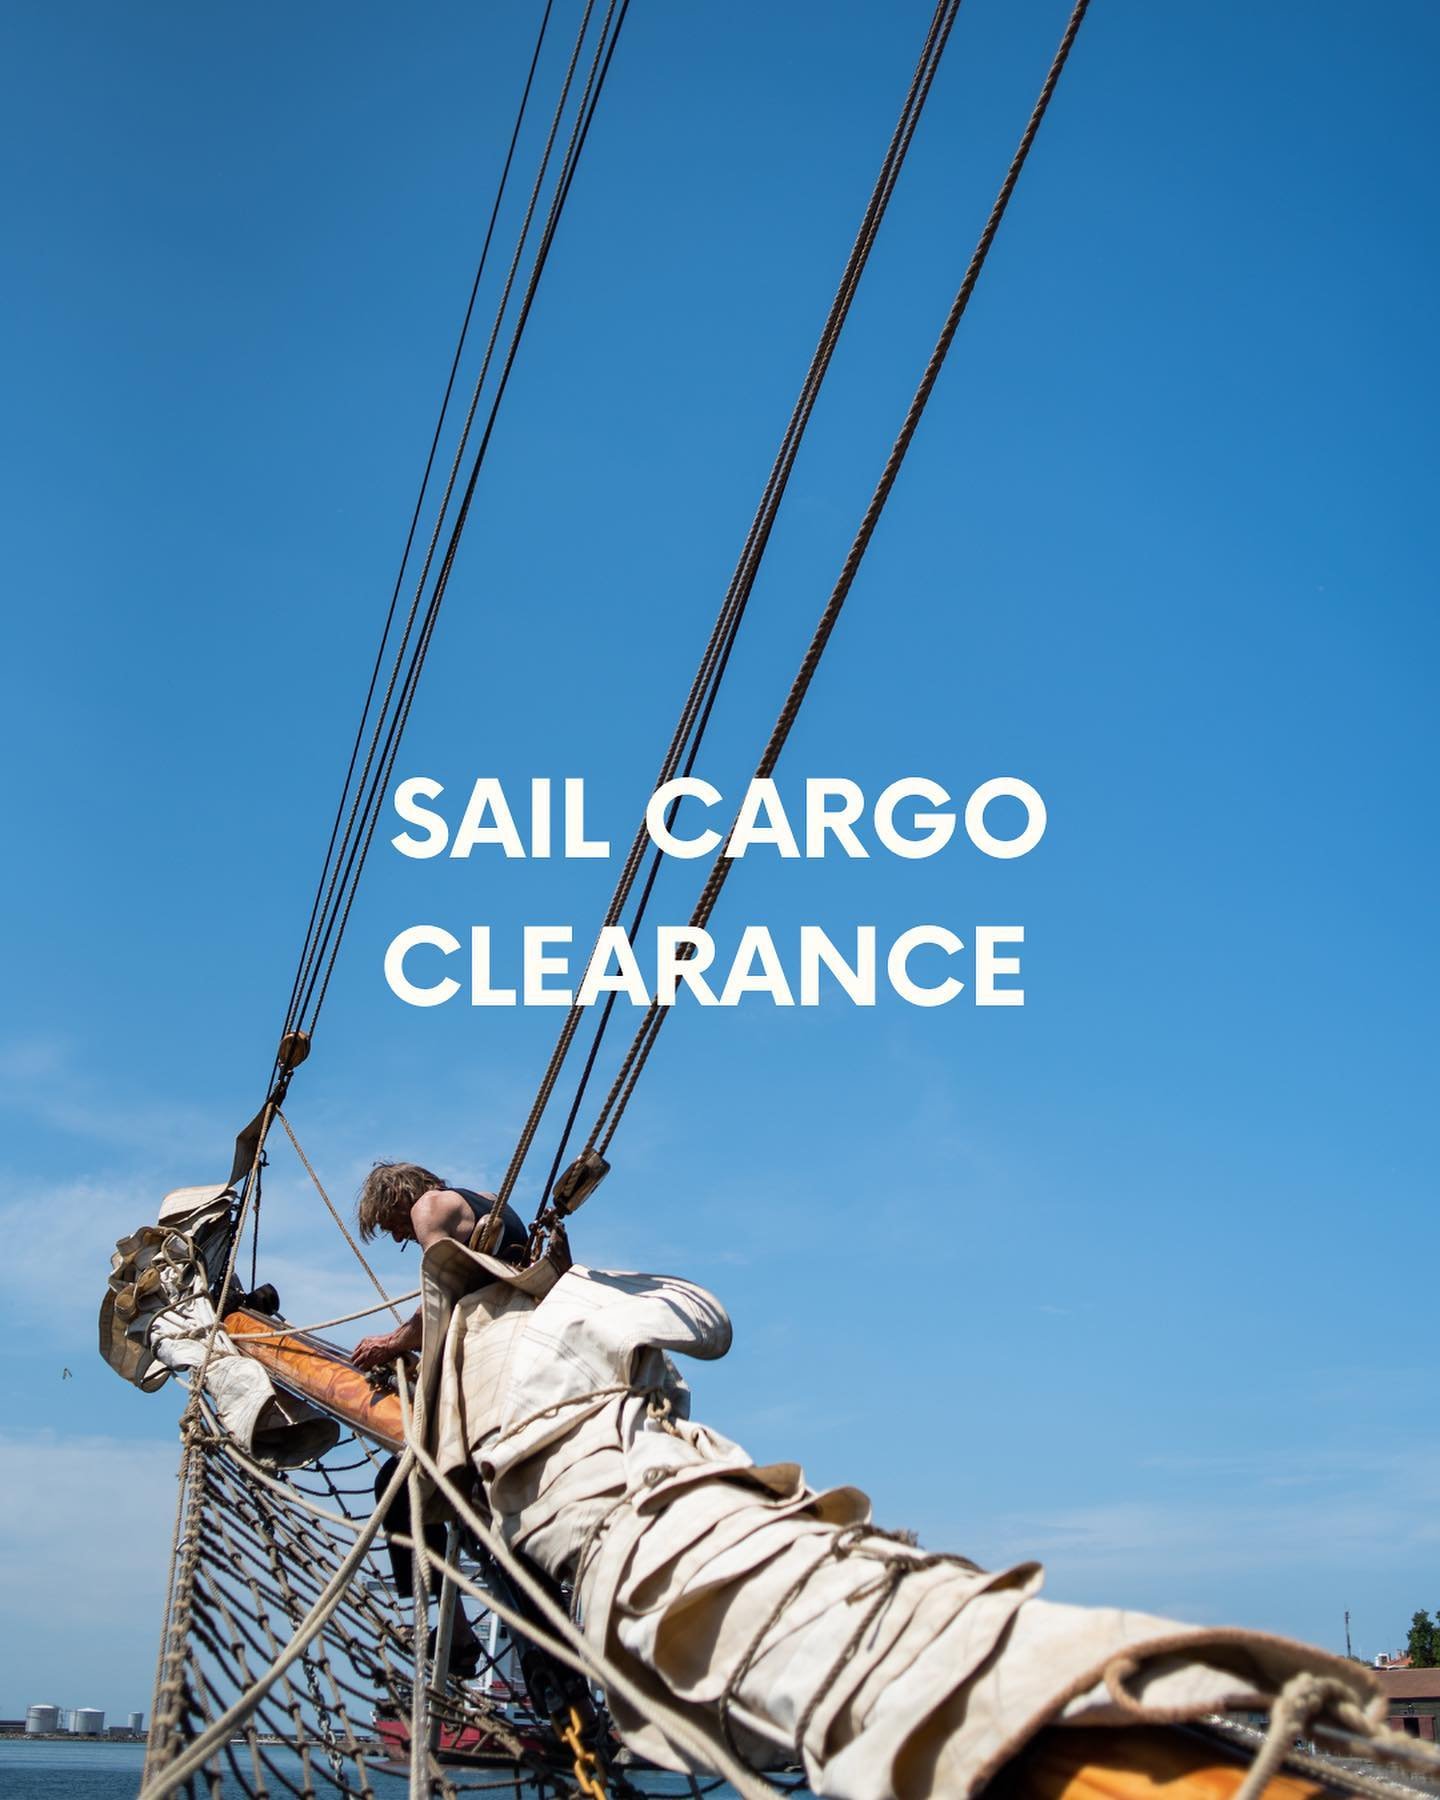 To clean the slates ahead of this year&rsquo;s cargo voyages we have opened our online ship with all remaining products priced to clear. 
-
Fill up on your sail cargo favourites at a bargain price, we&rsquo;d rather make a smaller loss on these sales